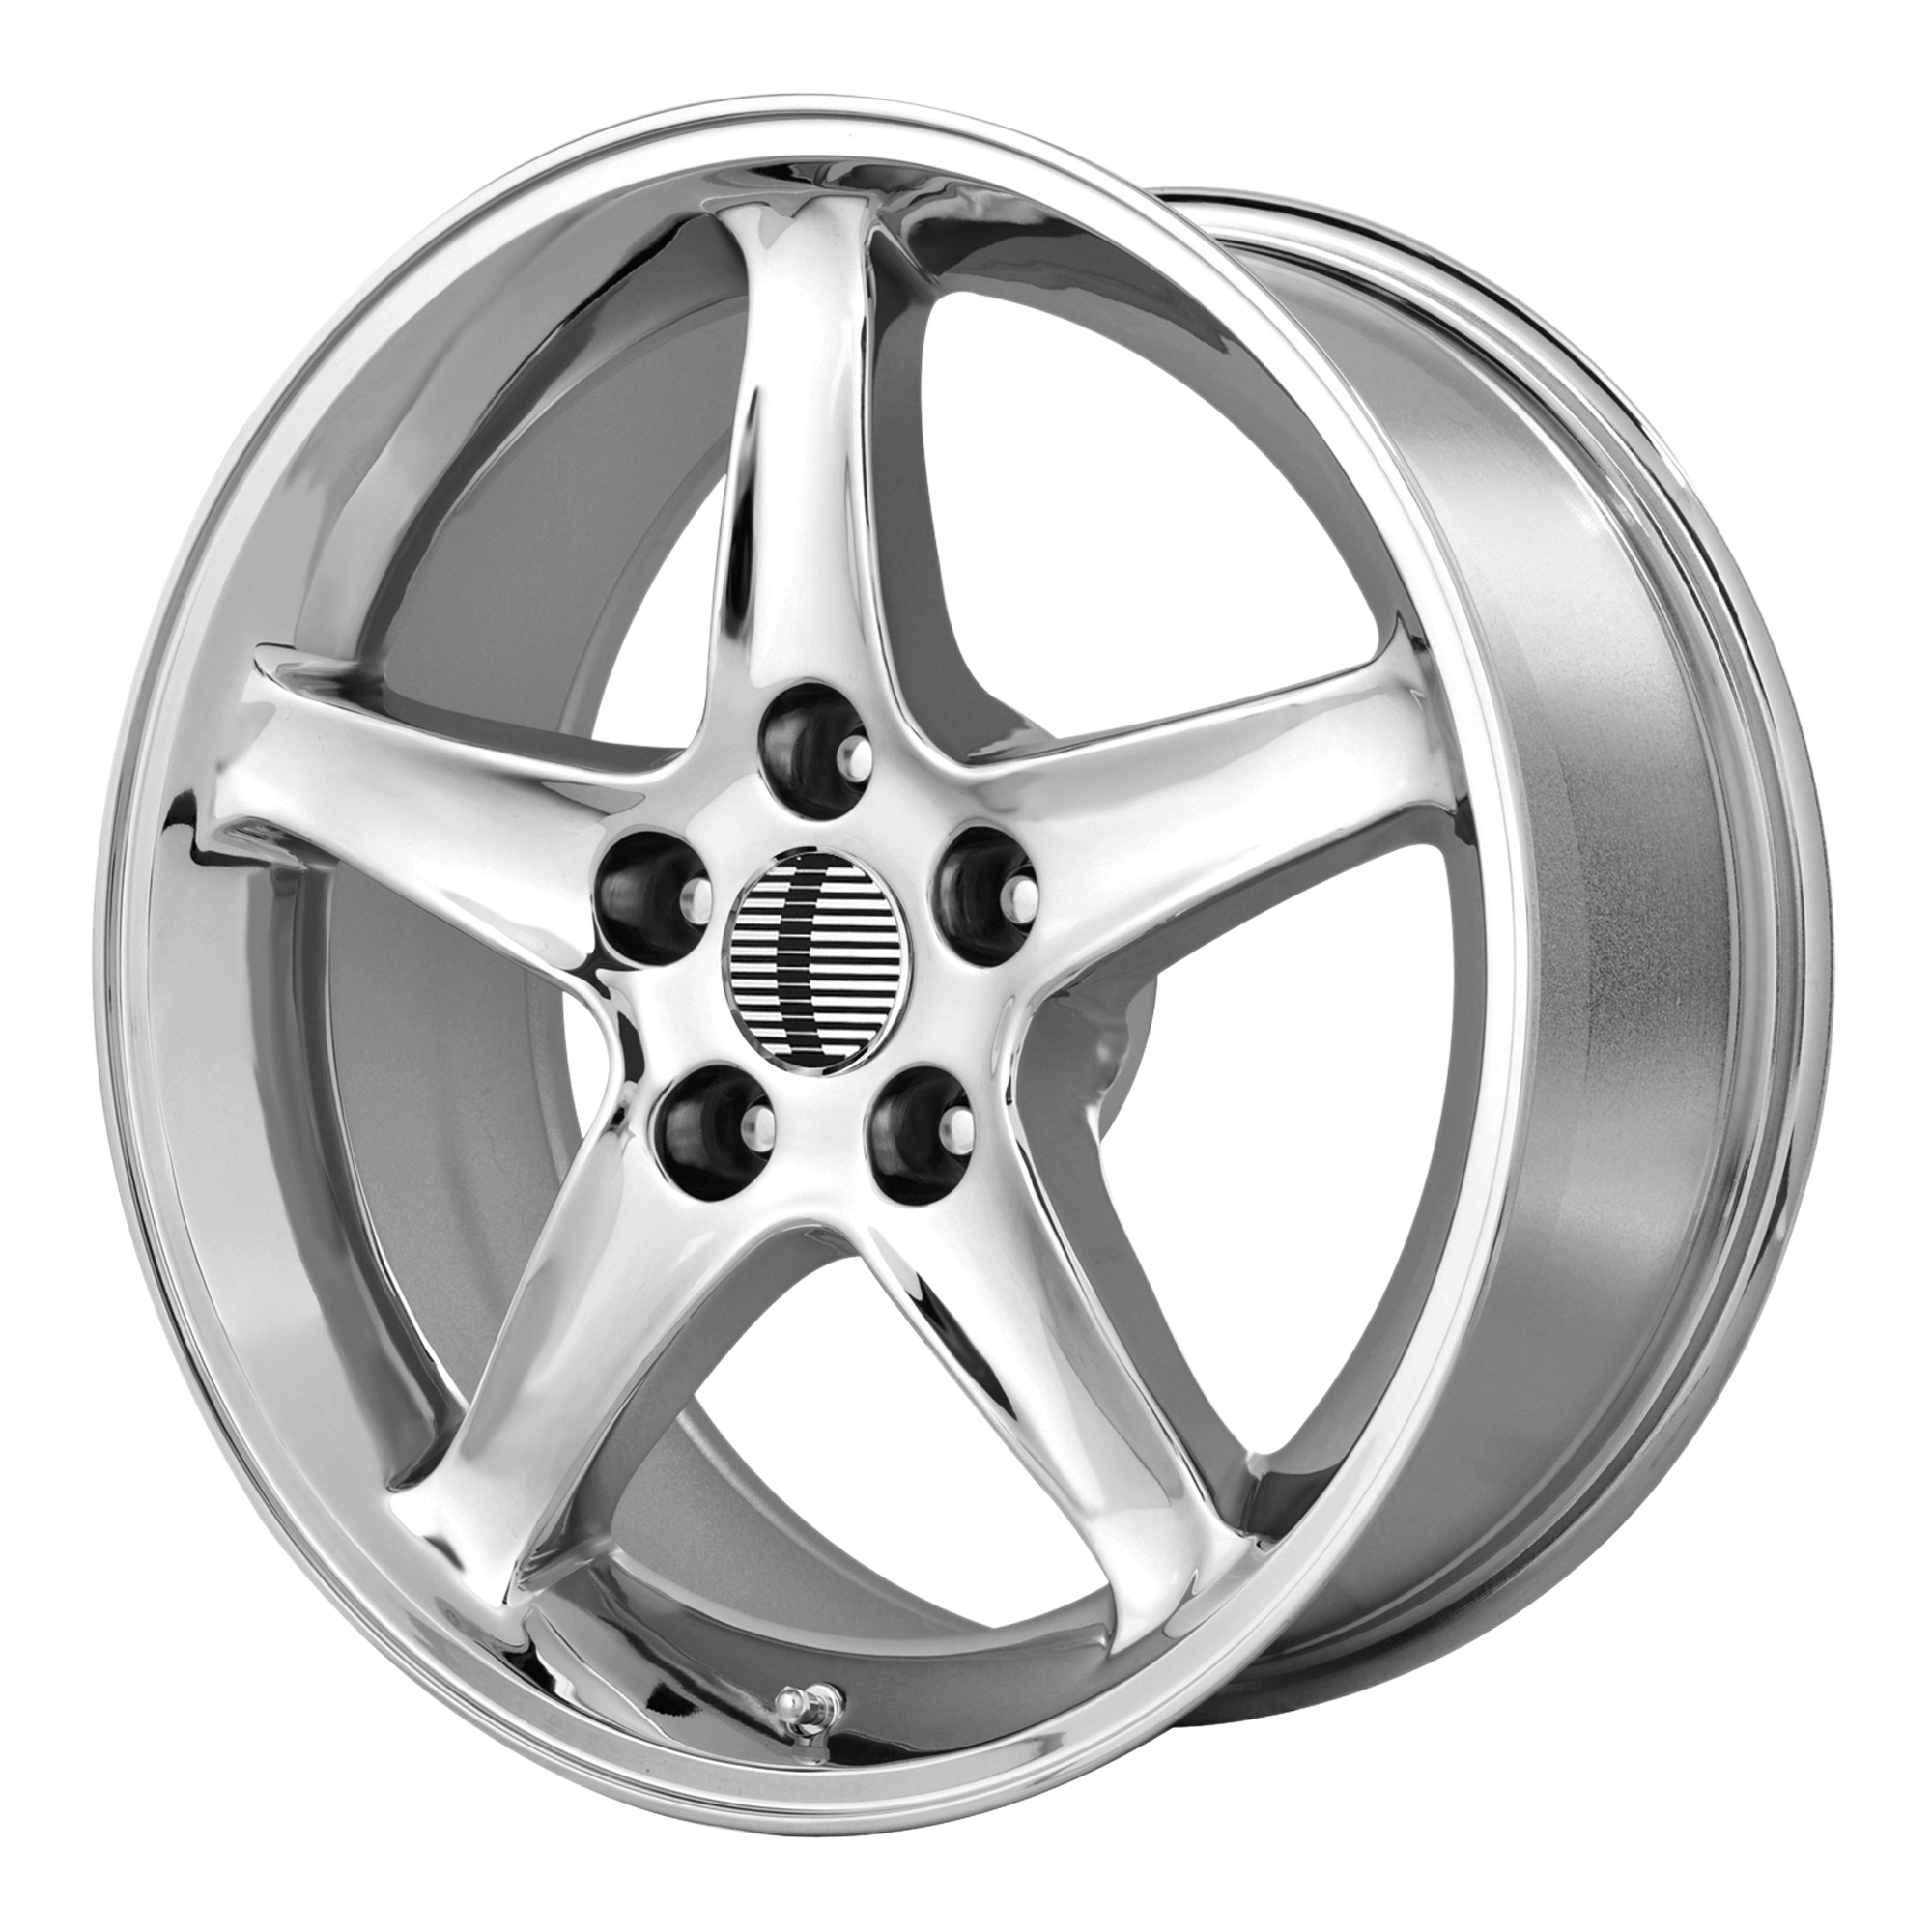 102C 17x9 4x108.00 CHROME (18 mm) - Tires and Engine Performance